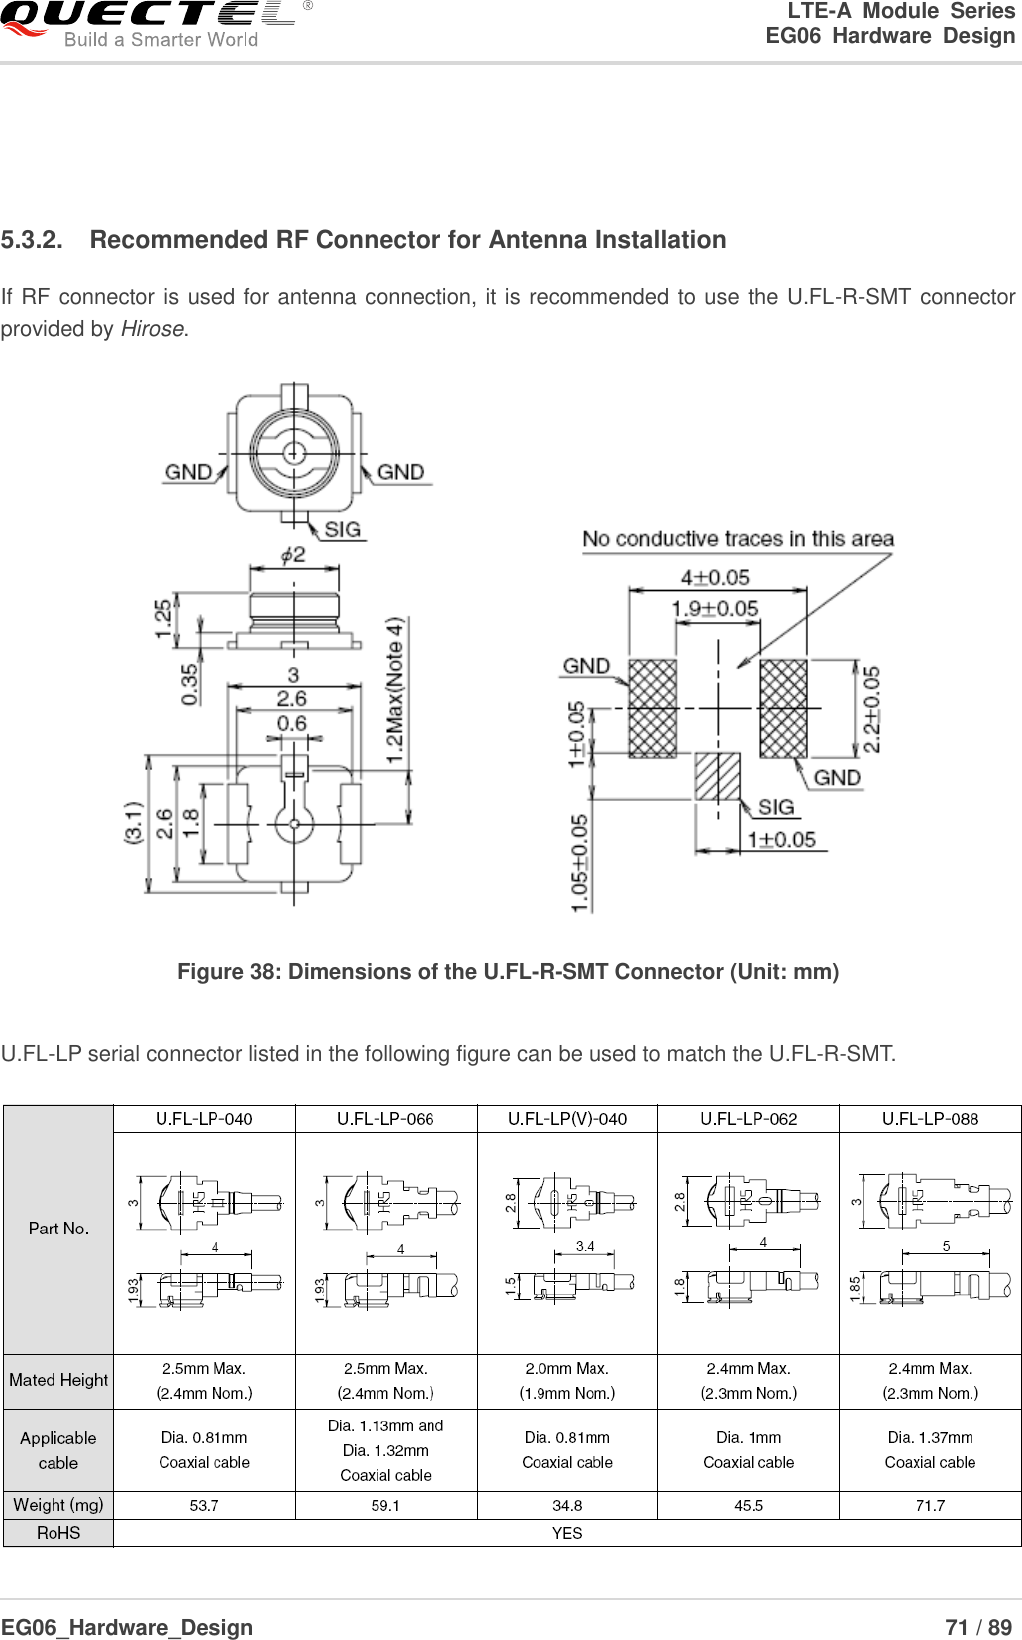 LTE-A  Module  Series                                                  EG06  Hardware  Design  EG06_Hardware_Design                                                               71 / 89       5.3.2.  Recommended RF Connector for Antenna Installation If RF connector is used for antenna connection, it is recommended to use the U.FL-R-SMT connector provided by Hirose.  Figure 38: Dimensions of the U.FL-R-SMT Connector (Unit: mm)  U.FL-LP serial connector listed in the following figure can be used to match the U.FL-R-SMT.  